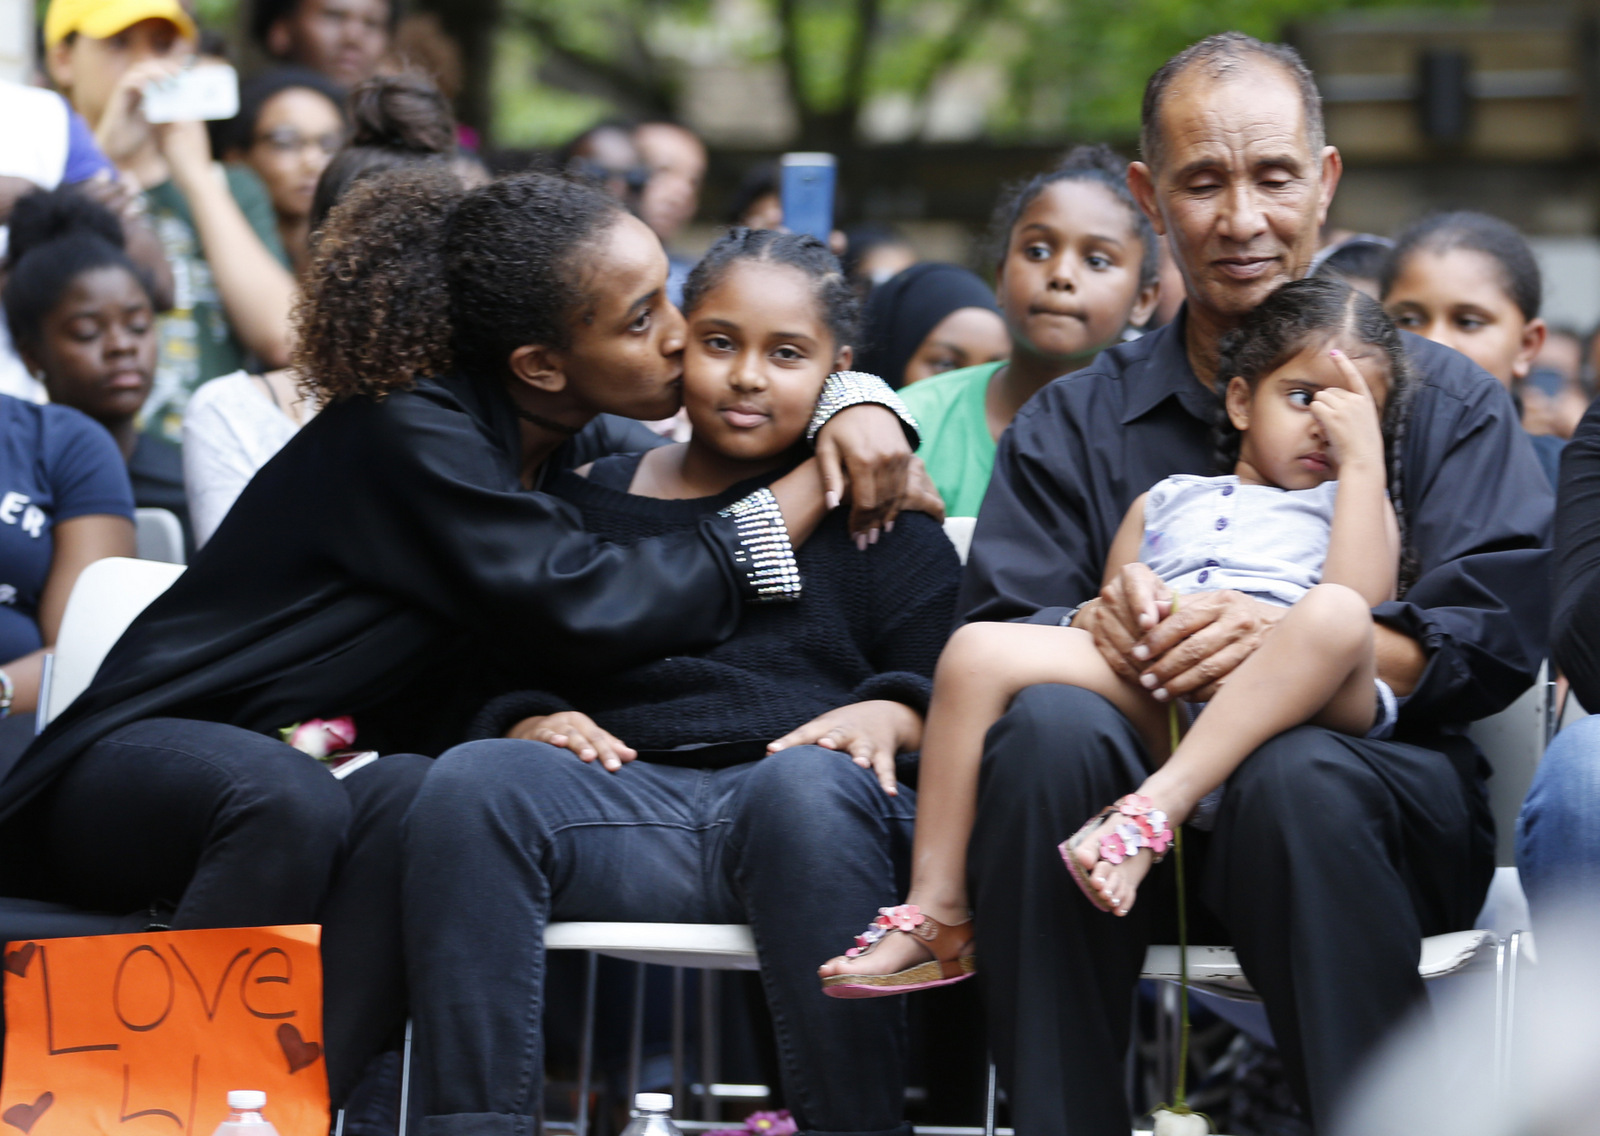 Mahmoud Hassanen Aboras father of Nabra Hassanen, who was killed over the weekend, sits with family as he listens to speakers during a vigil in honor of Nabra Wednesday, June 21, 2017, in Reston, Va. (AP/Steve Helber)